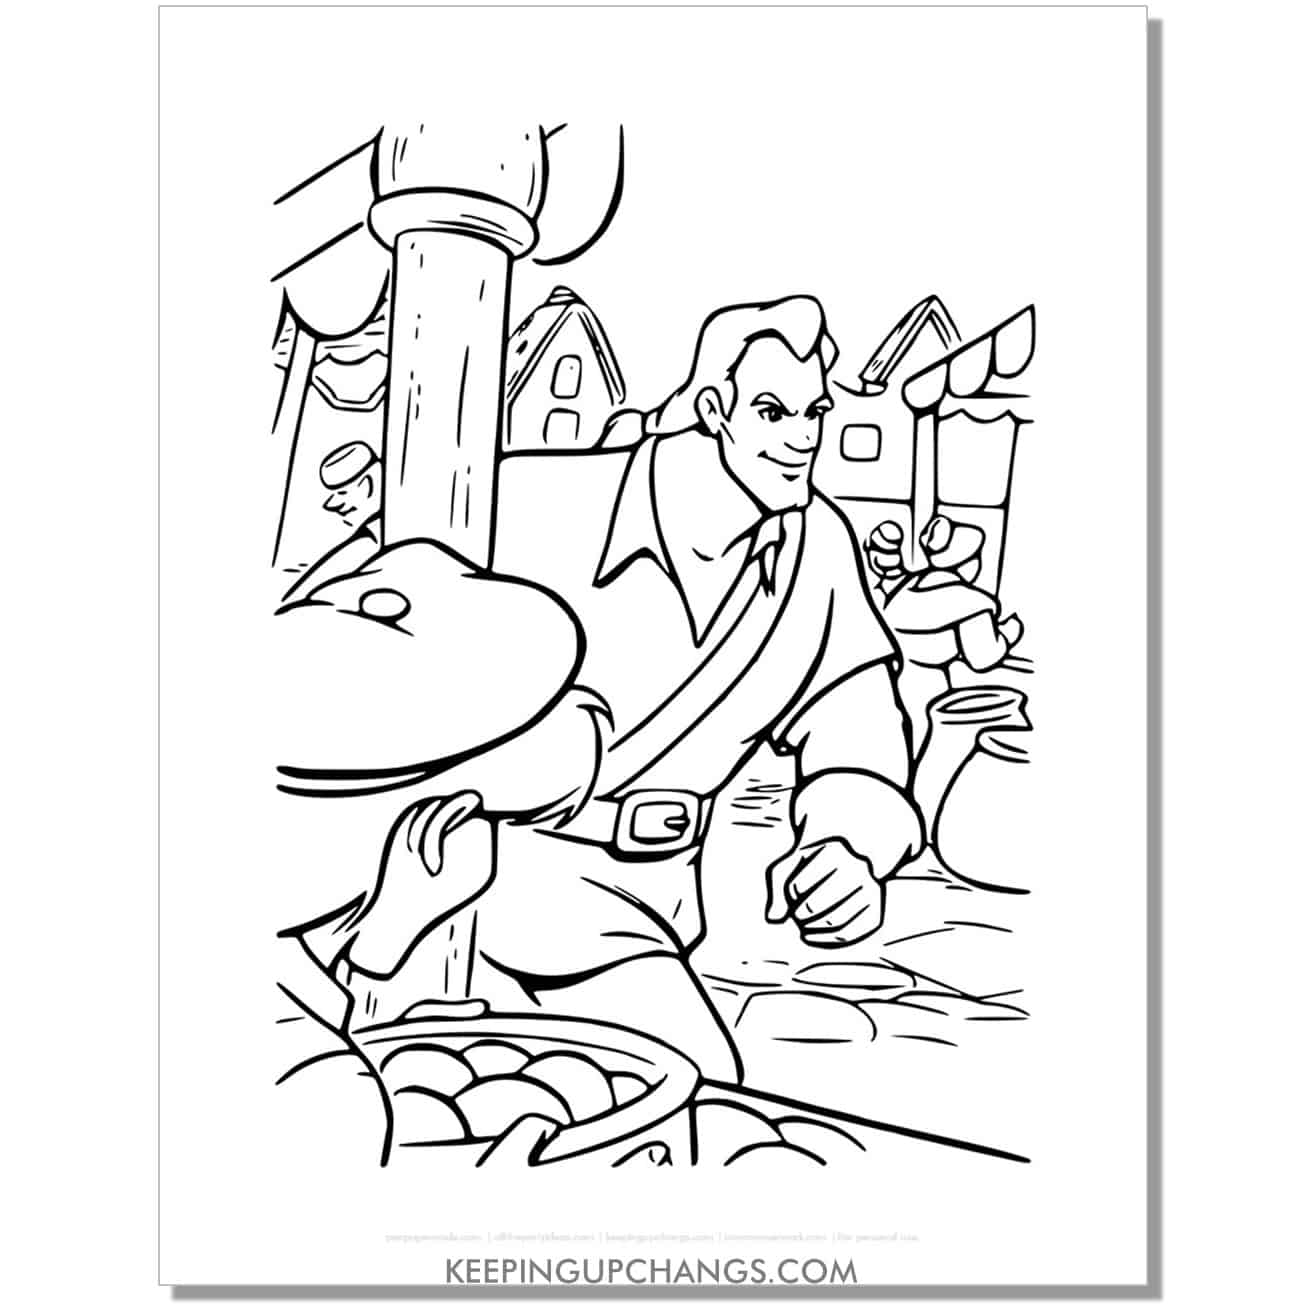 beauty and beast gaston in street market coloring page, sheet.